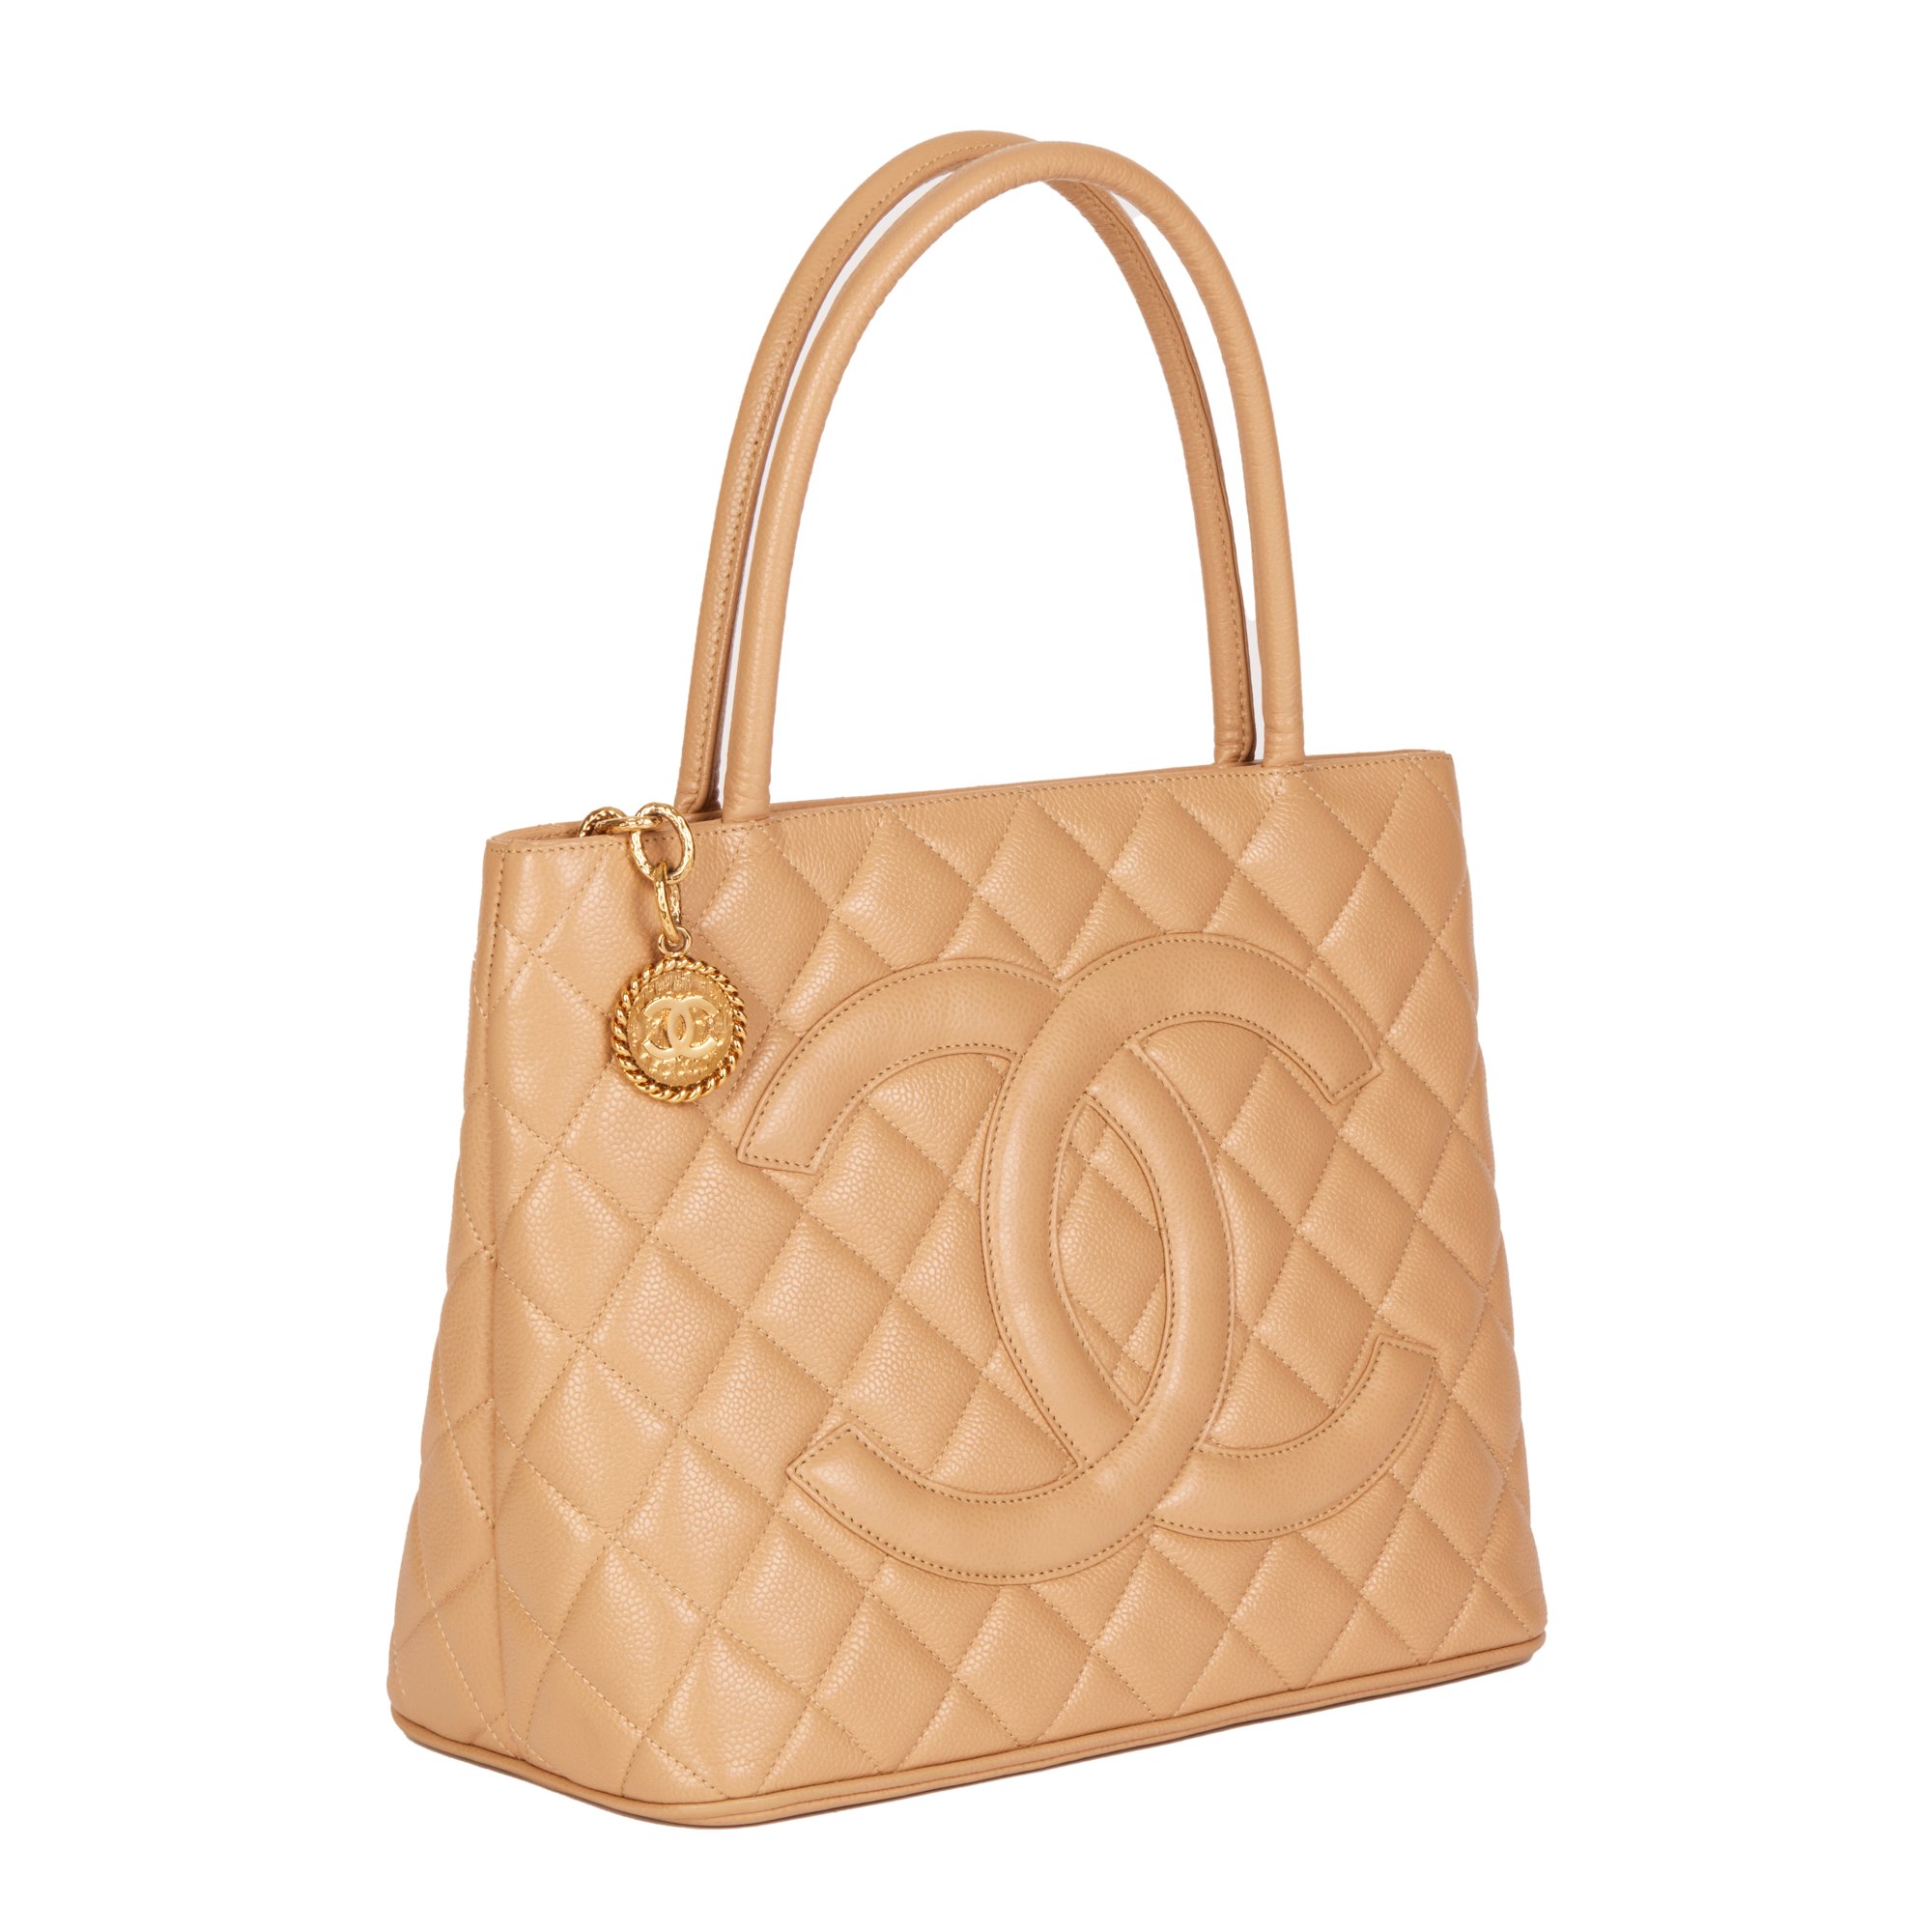 Chanel Beige Quilted Caviar Leather Vintage Medallion Tote